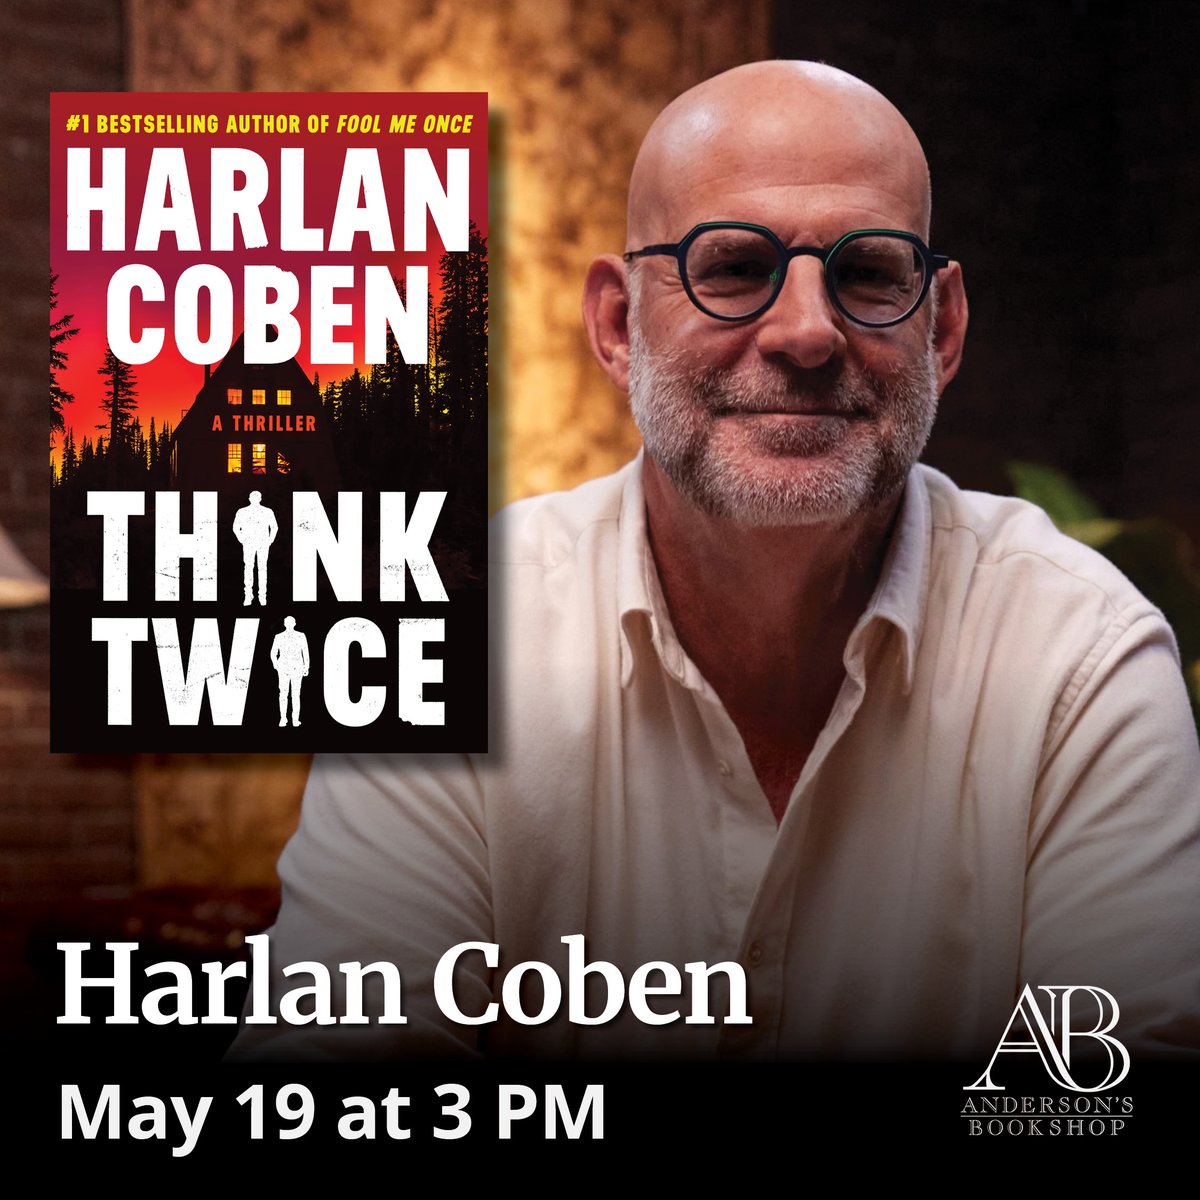 ALMOST SOLD OUT: May 19th, we welcome the one and only mega bestselling king of Netflix adaptations, Harlen Coben @HarlanCoben Harlan will be in convo with a bookseller, take some Q&A, and have a photo/signing line! TICKETS: HarlanCobenAndersons.eventcombo.com